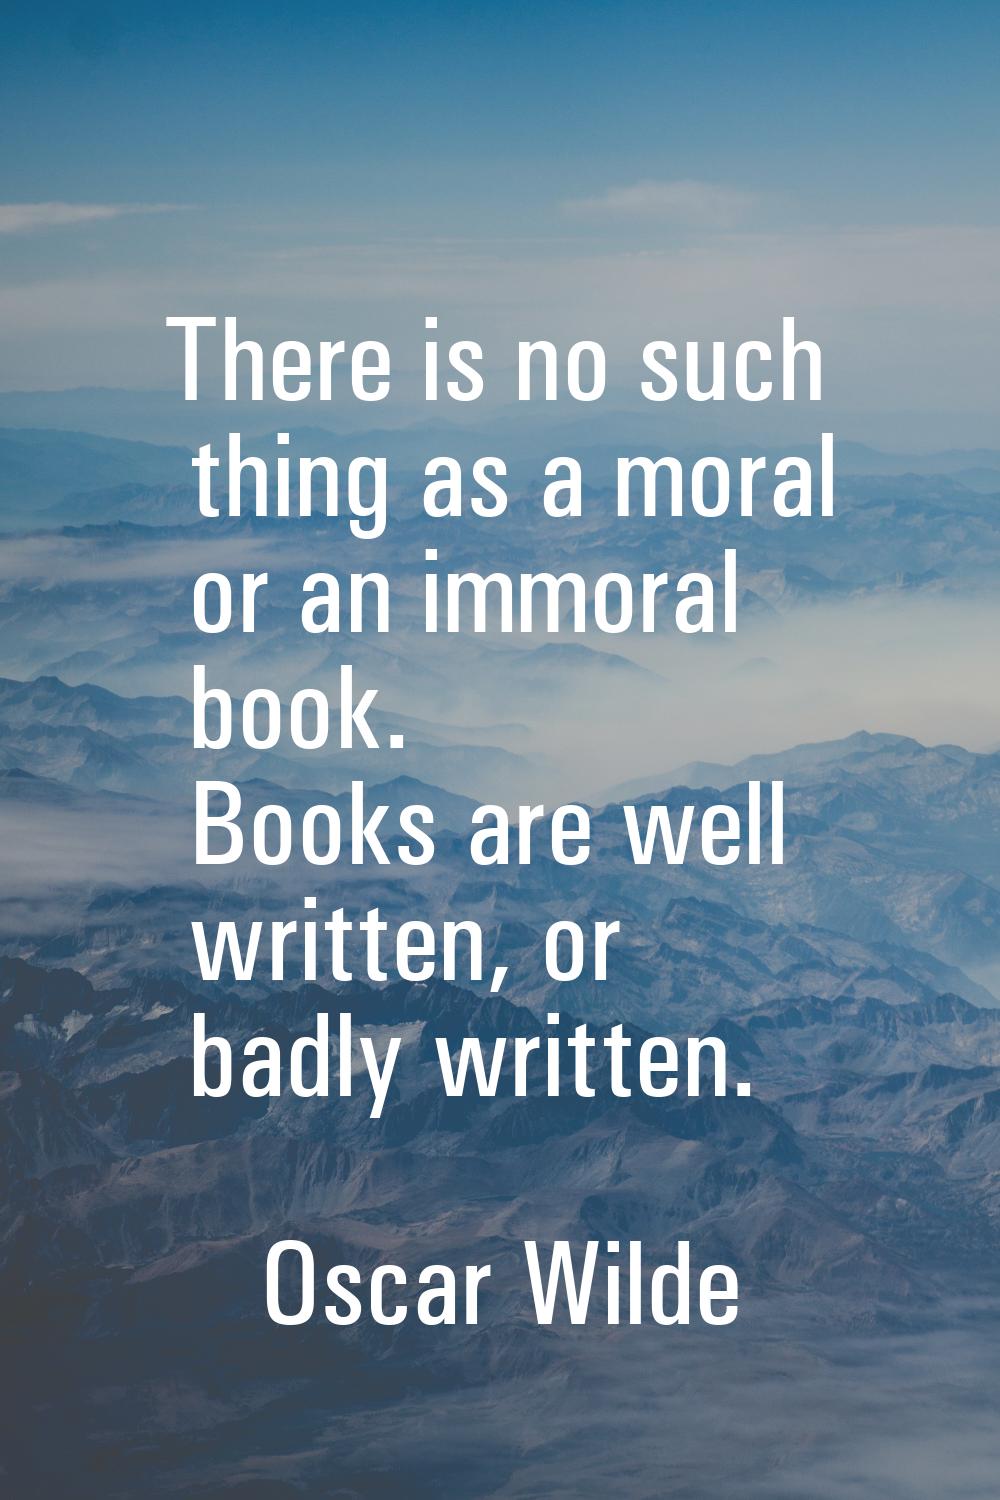 There is no such thing as a moral or an immoral book. Books are well written, or badly written.